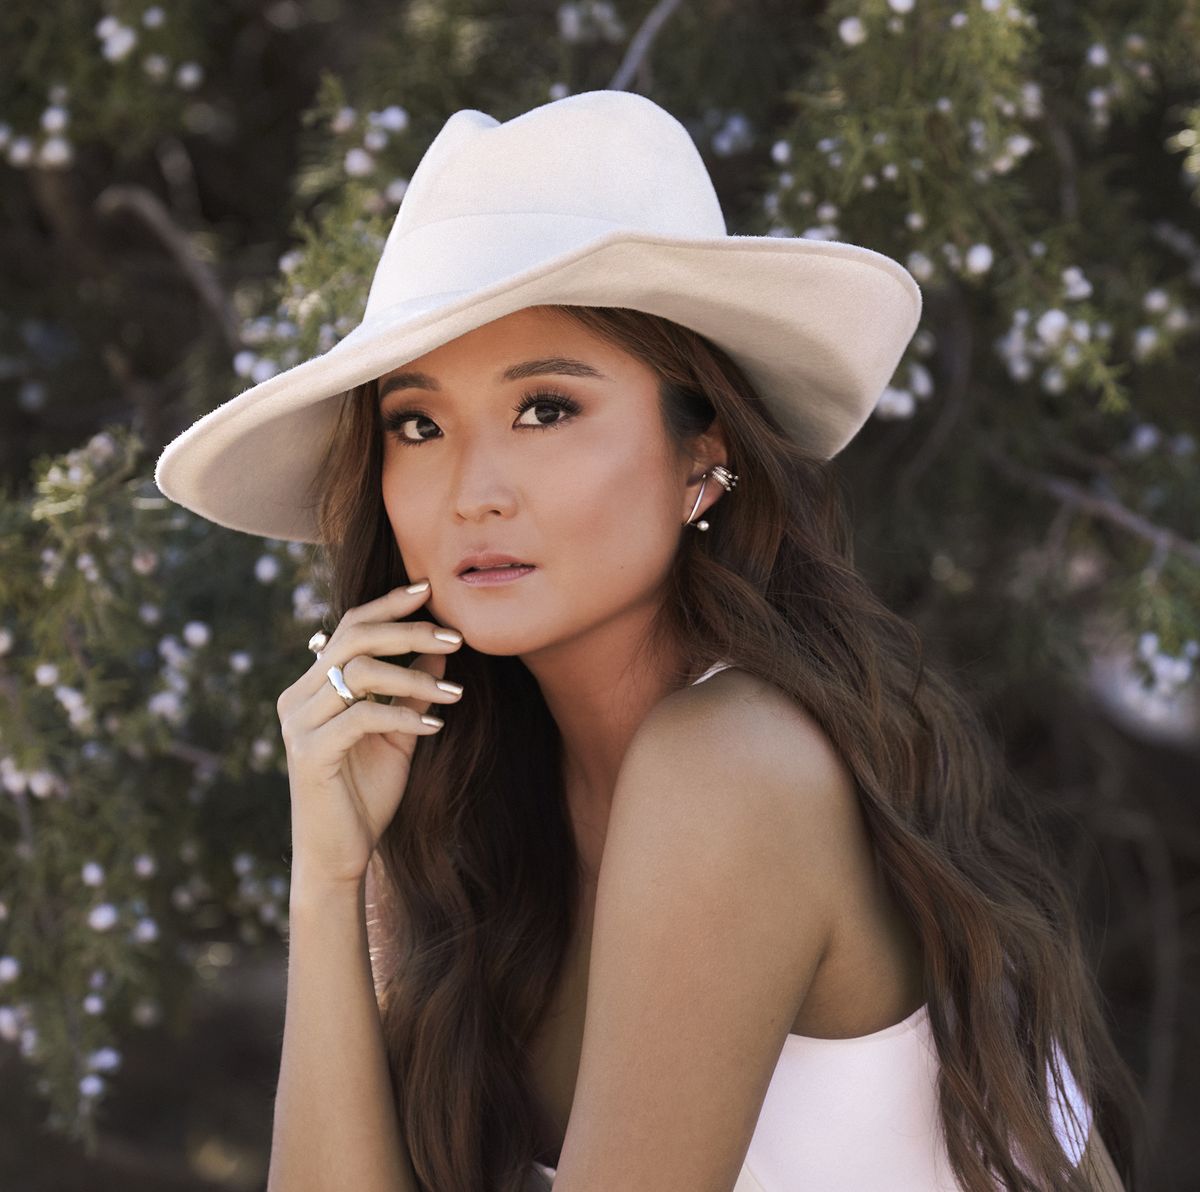 ashley park poses in front of plants wearing cream fedora hat, white tank top, and jewelry